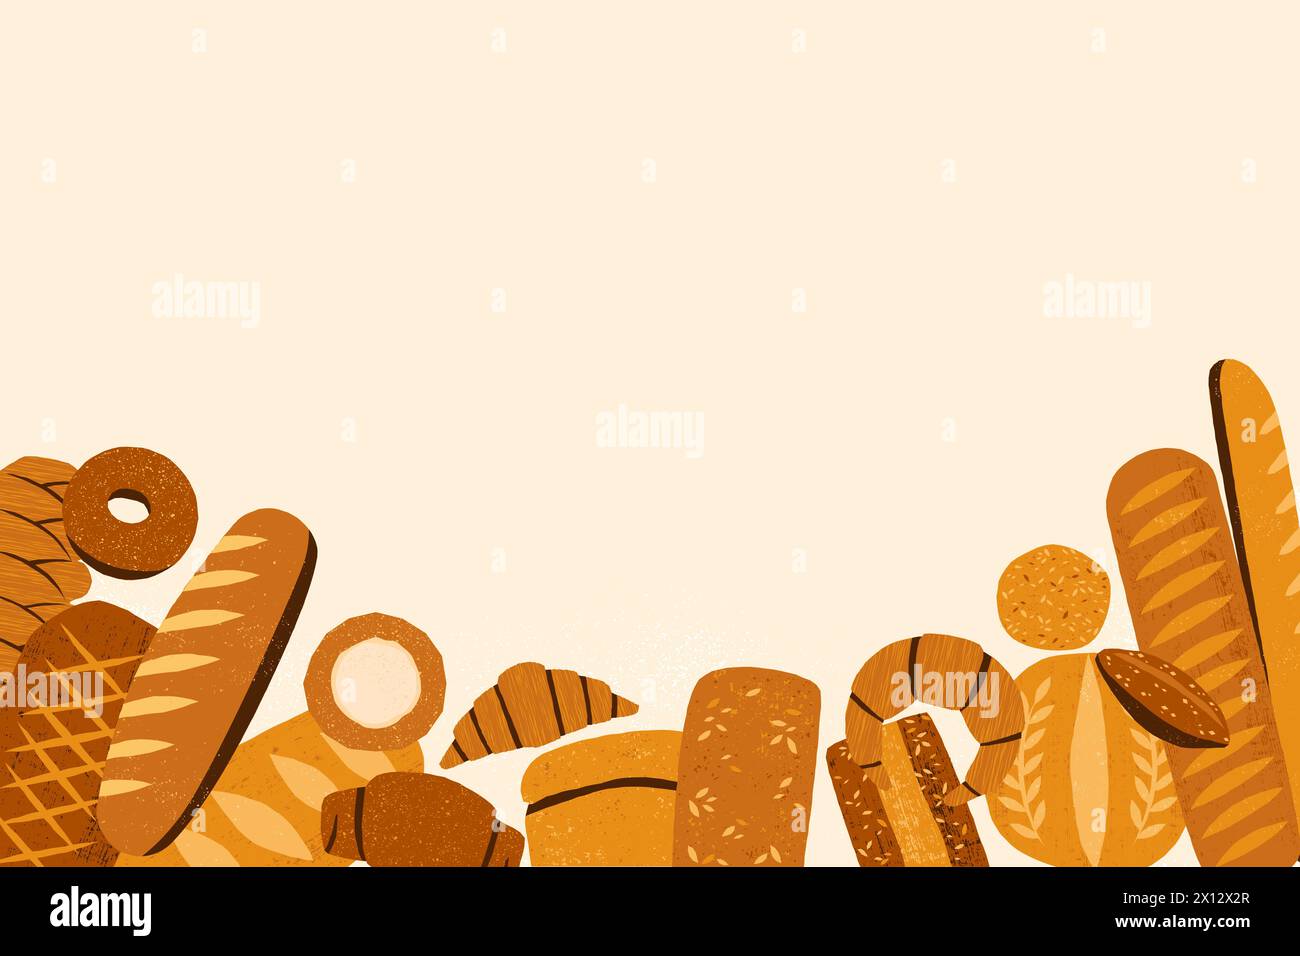 Bread background. Vintage bakery banner with bagels croissants baguette, traditional food assortment, crusty baked nutrition concept. Vector Stock Vector